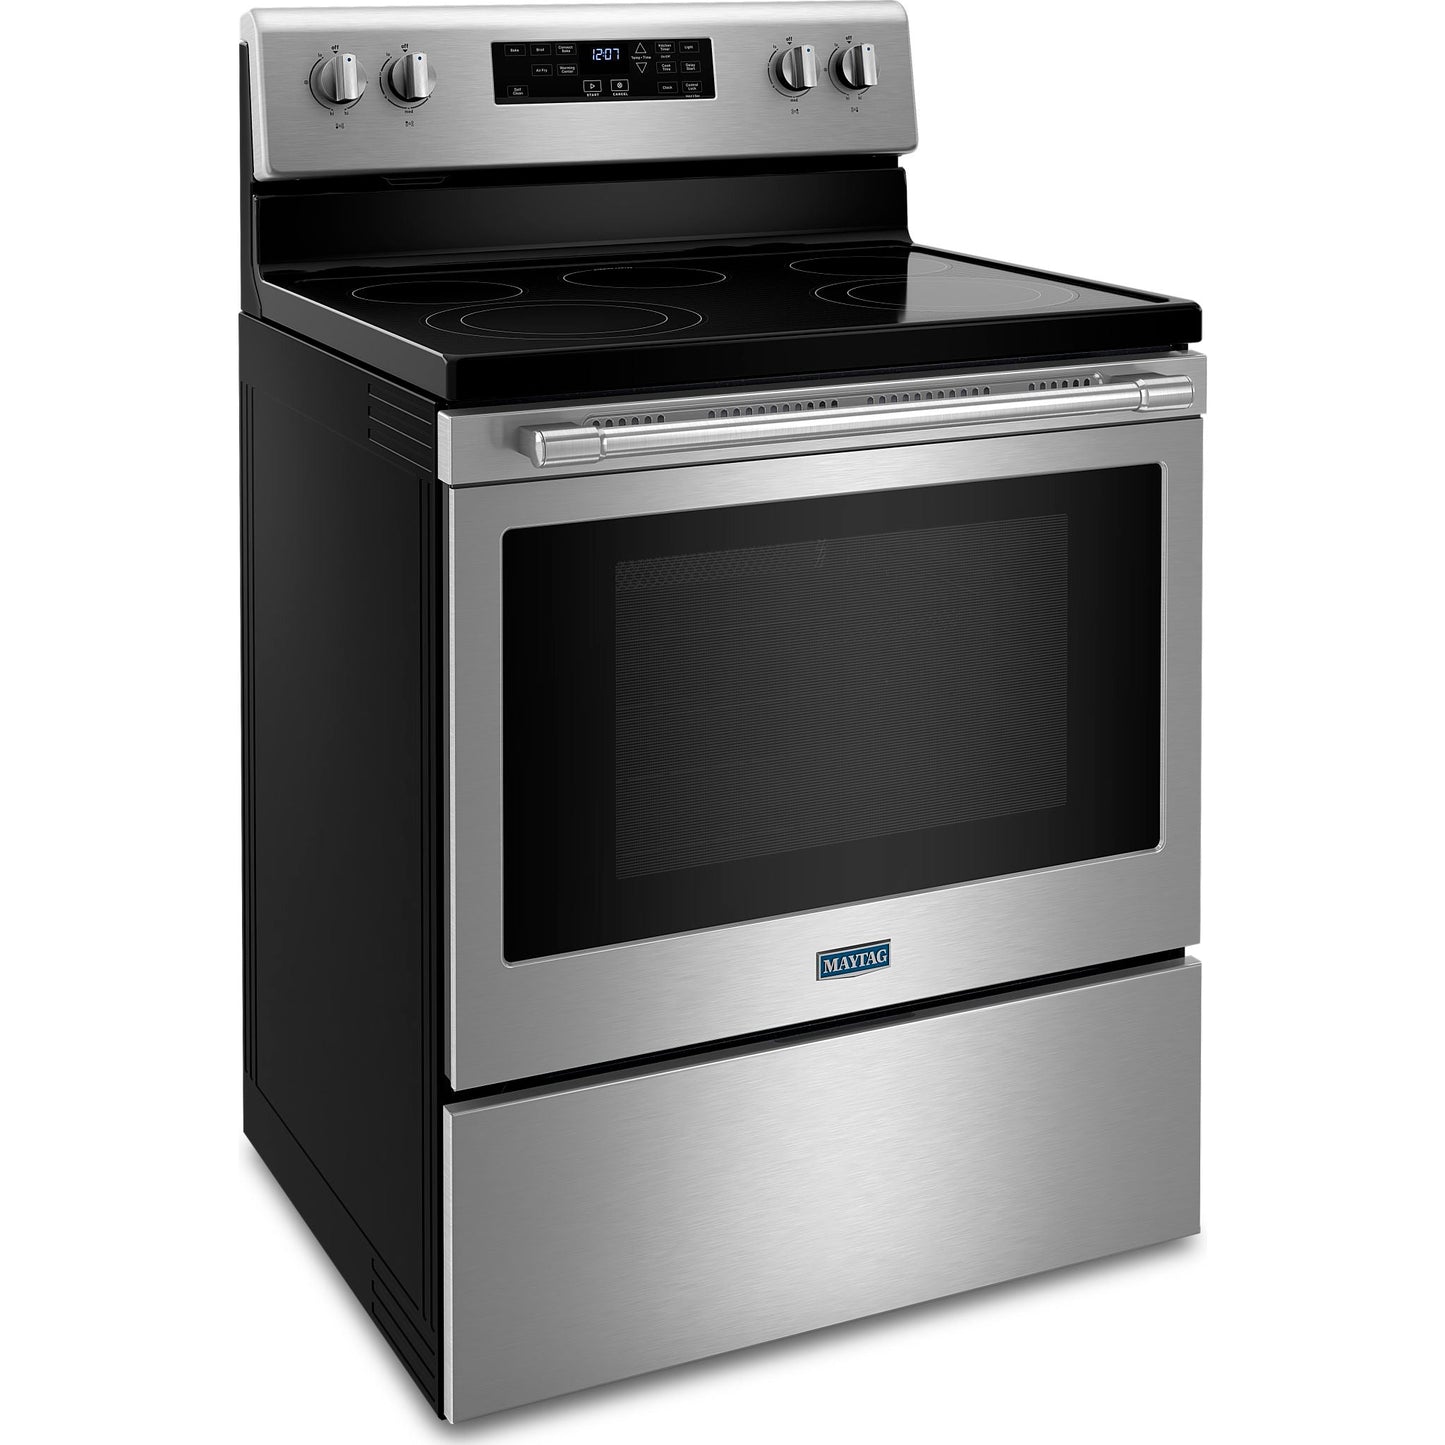 Maytag Electric Range (YMER7700LZ) - STAINLESS STEEL